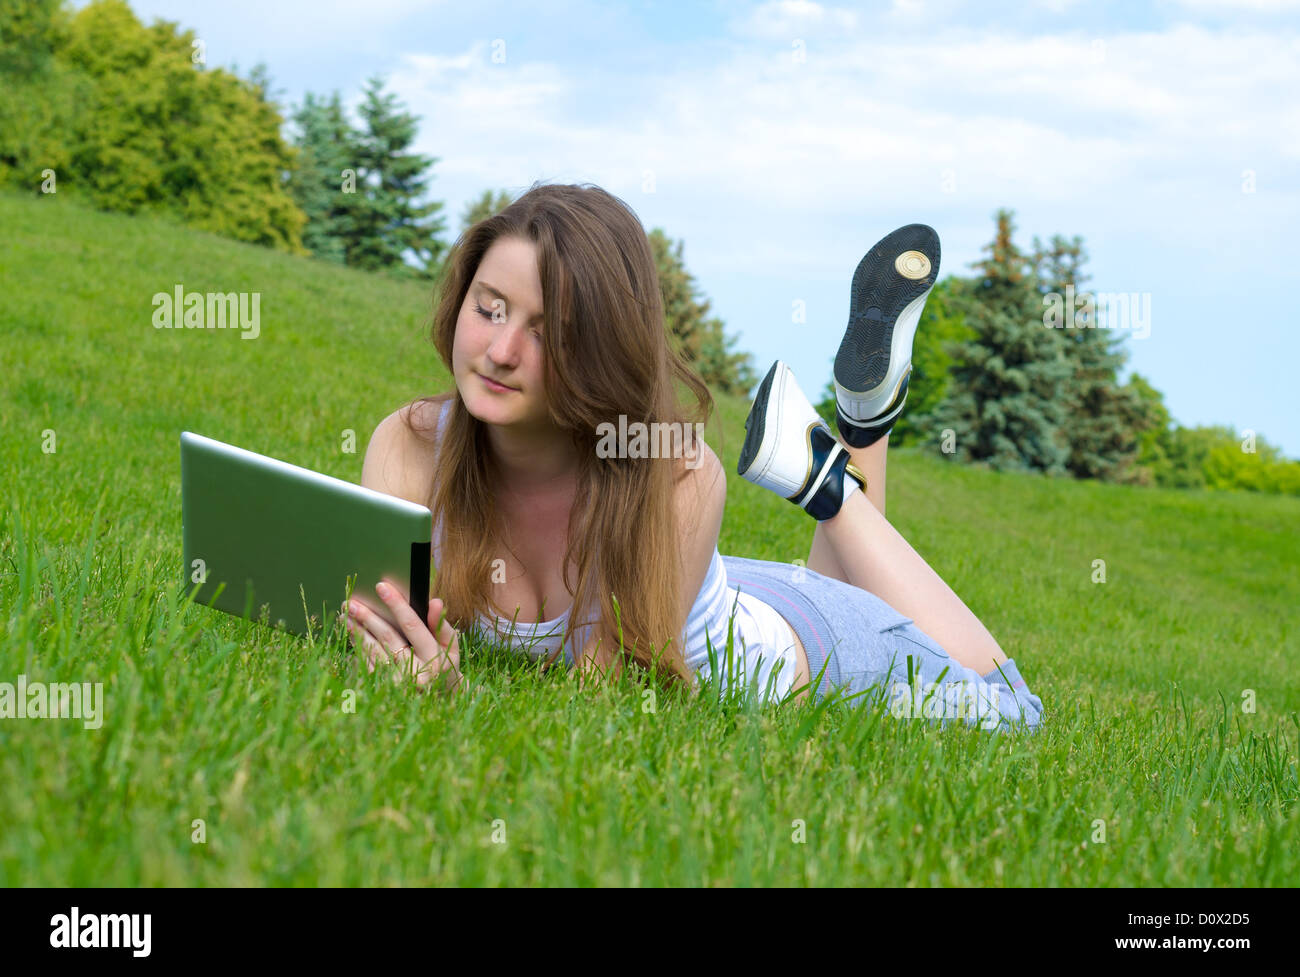 Woman lying on a grassy slope outdoors relaxing with a touchscreen tablet Stock Photo